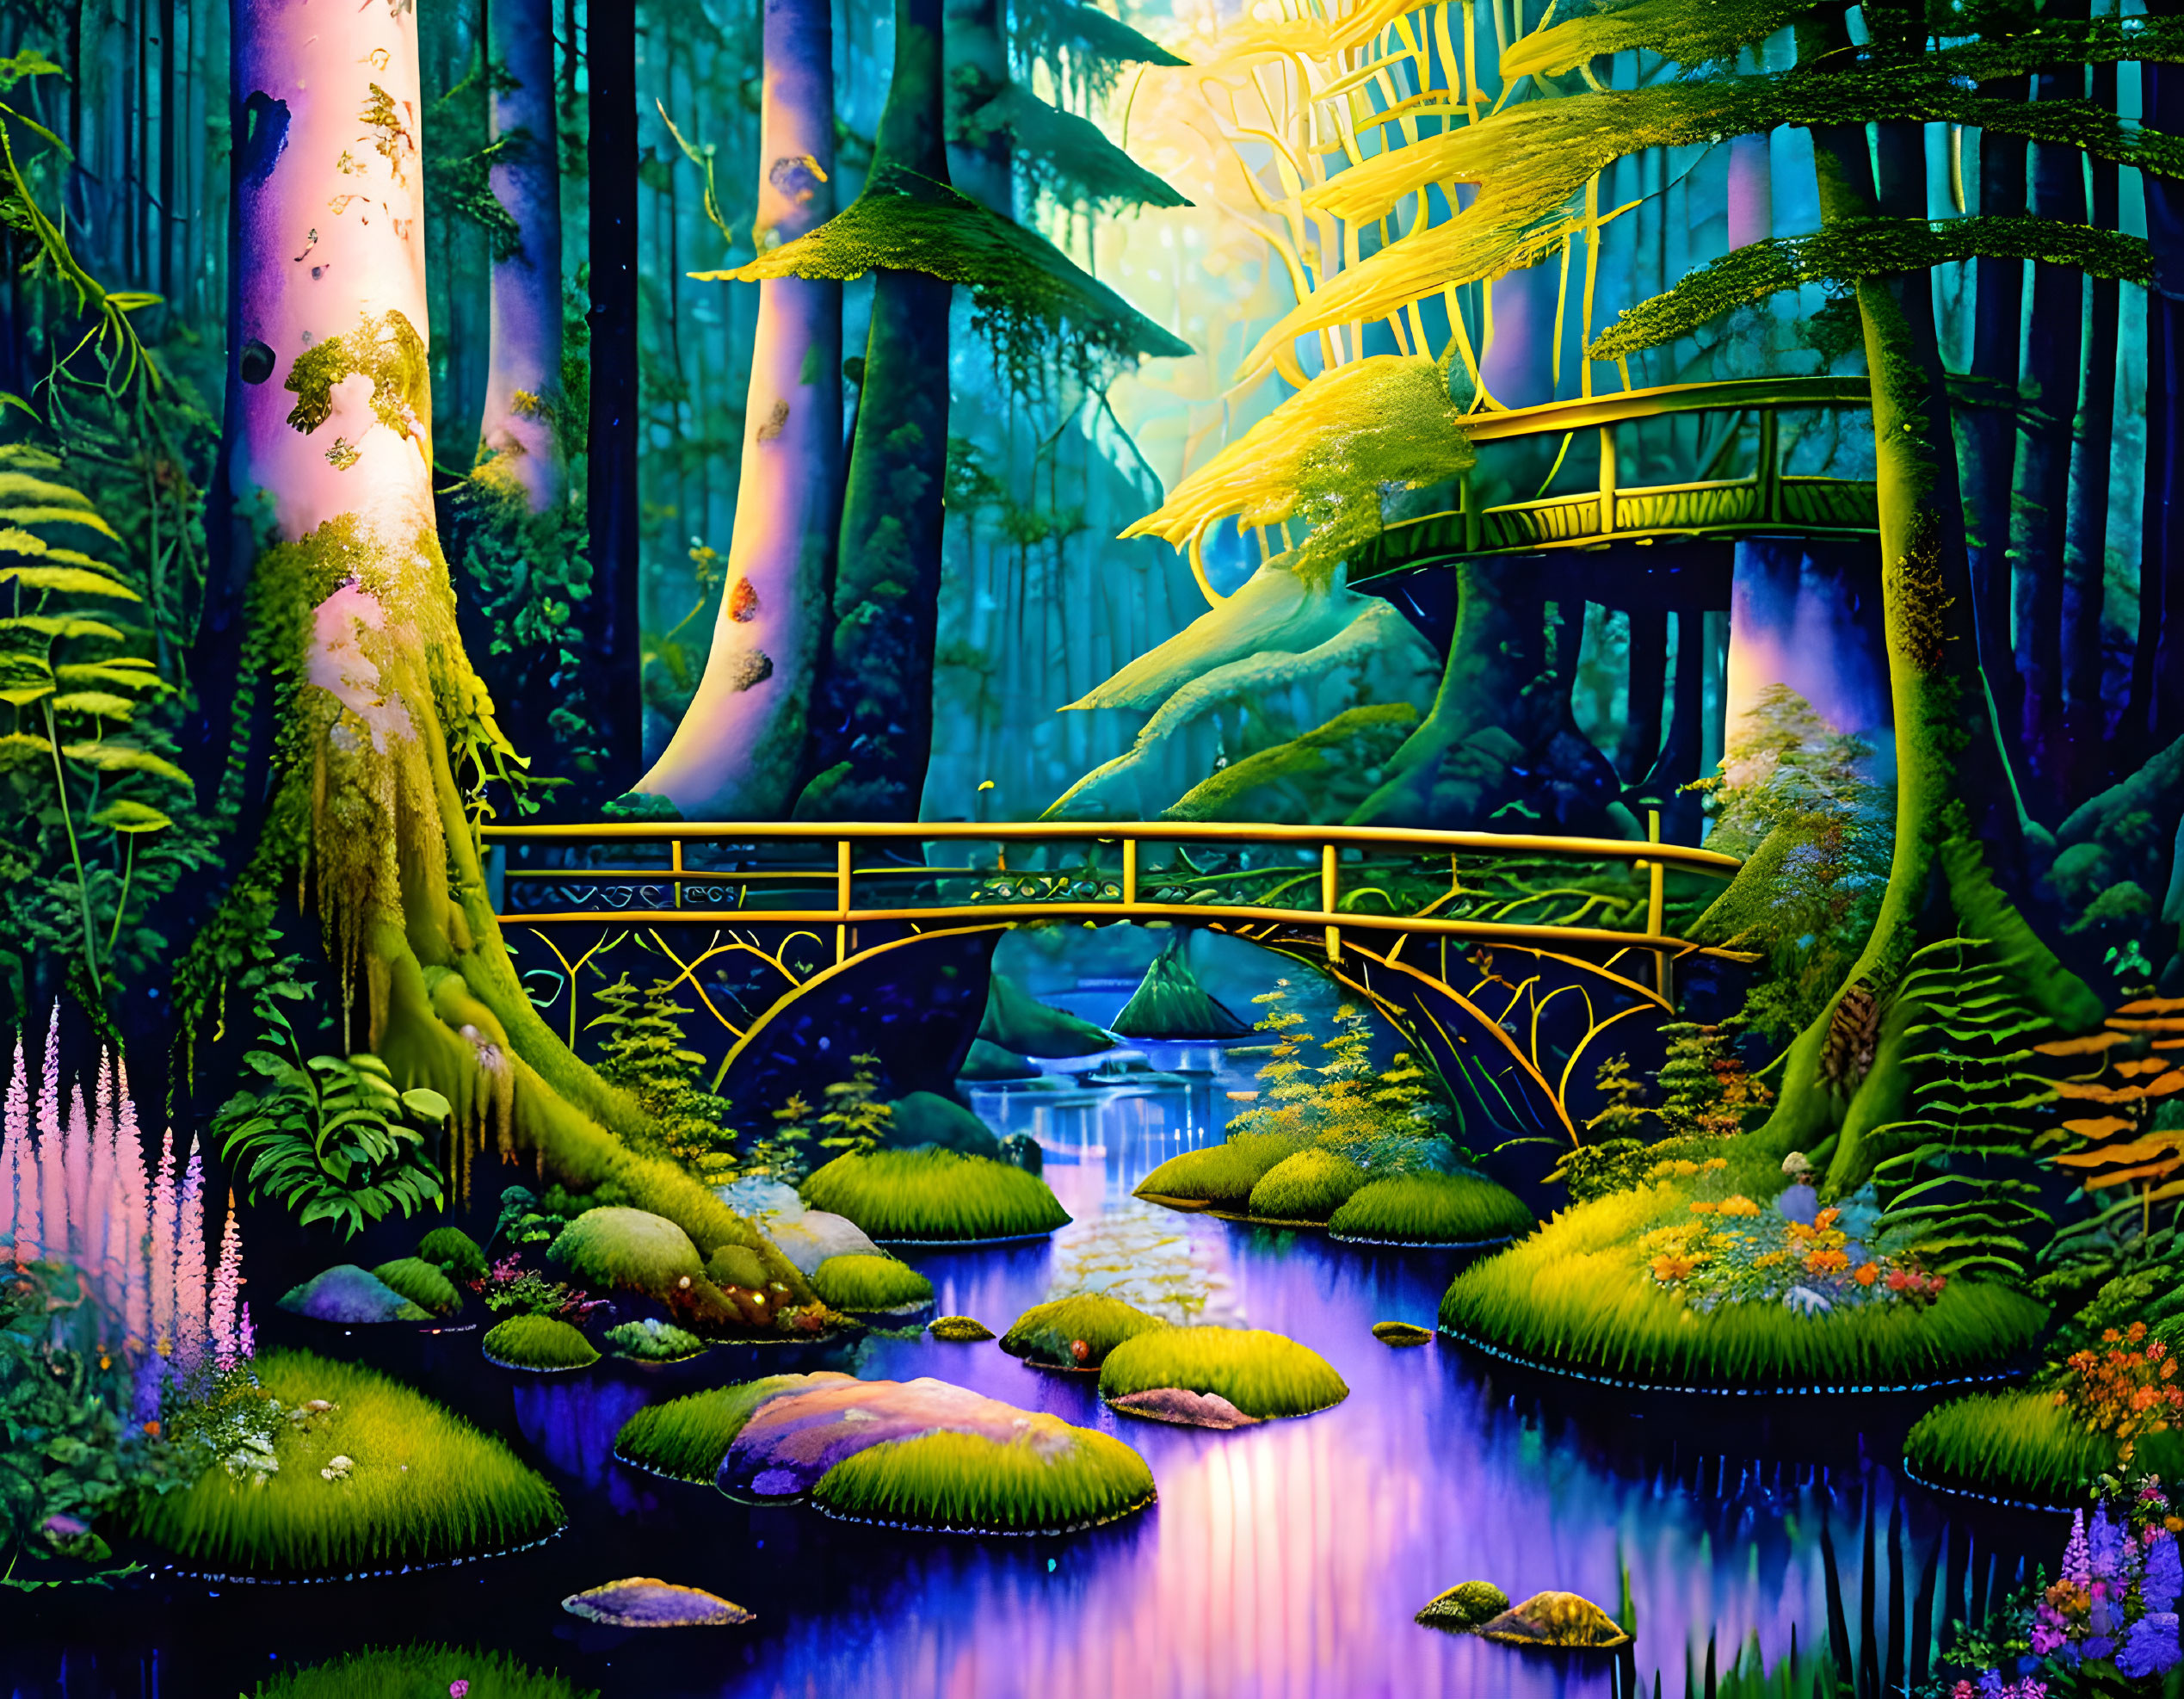 Golden Bridge Over Tranquil River in Enchanted Forest